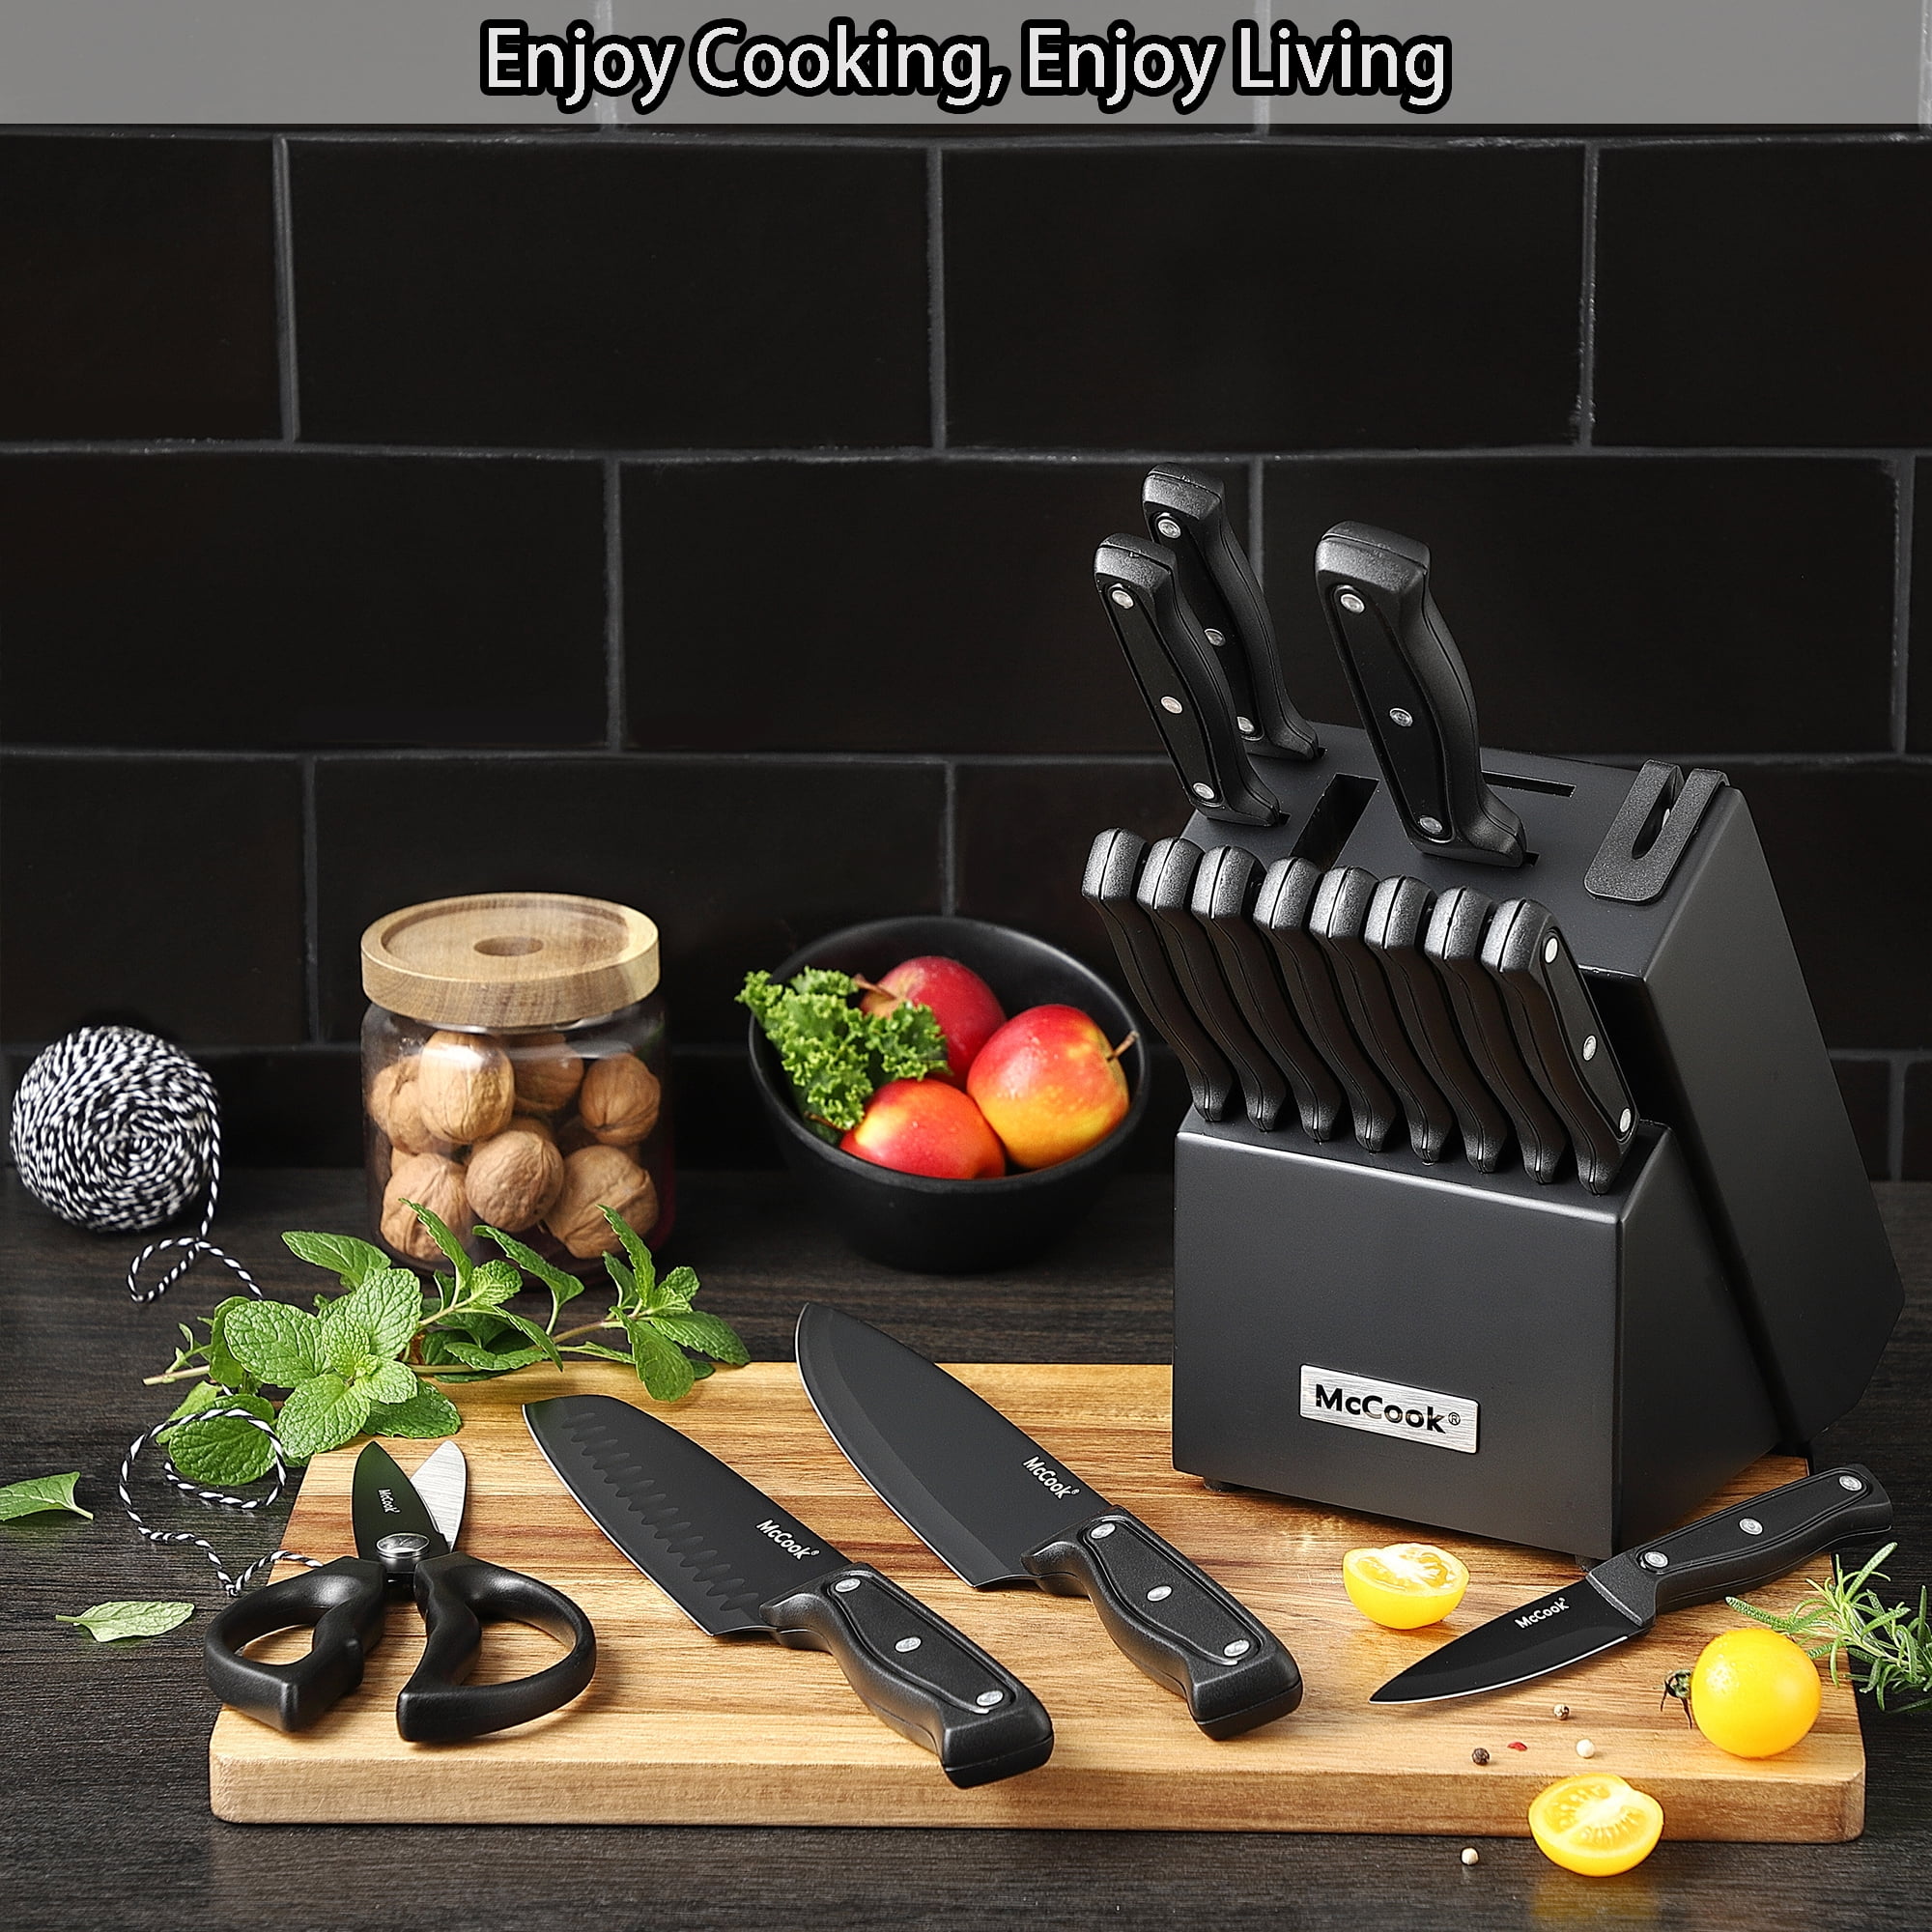 McCook MC21B Knife Sets Review. SEE THE PRICE ON , by KitchenVS